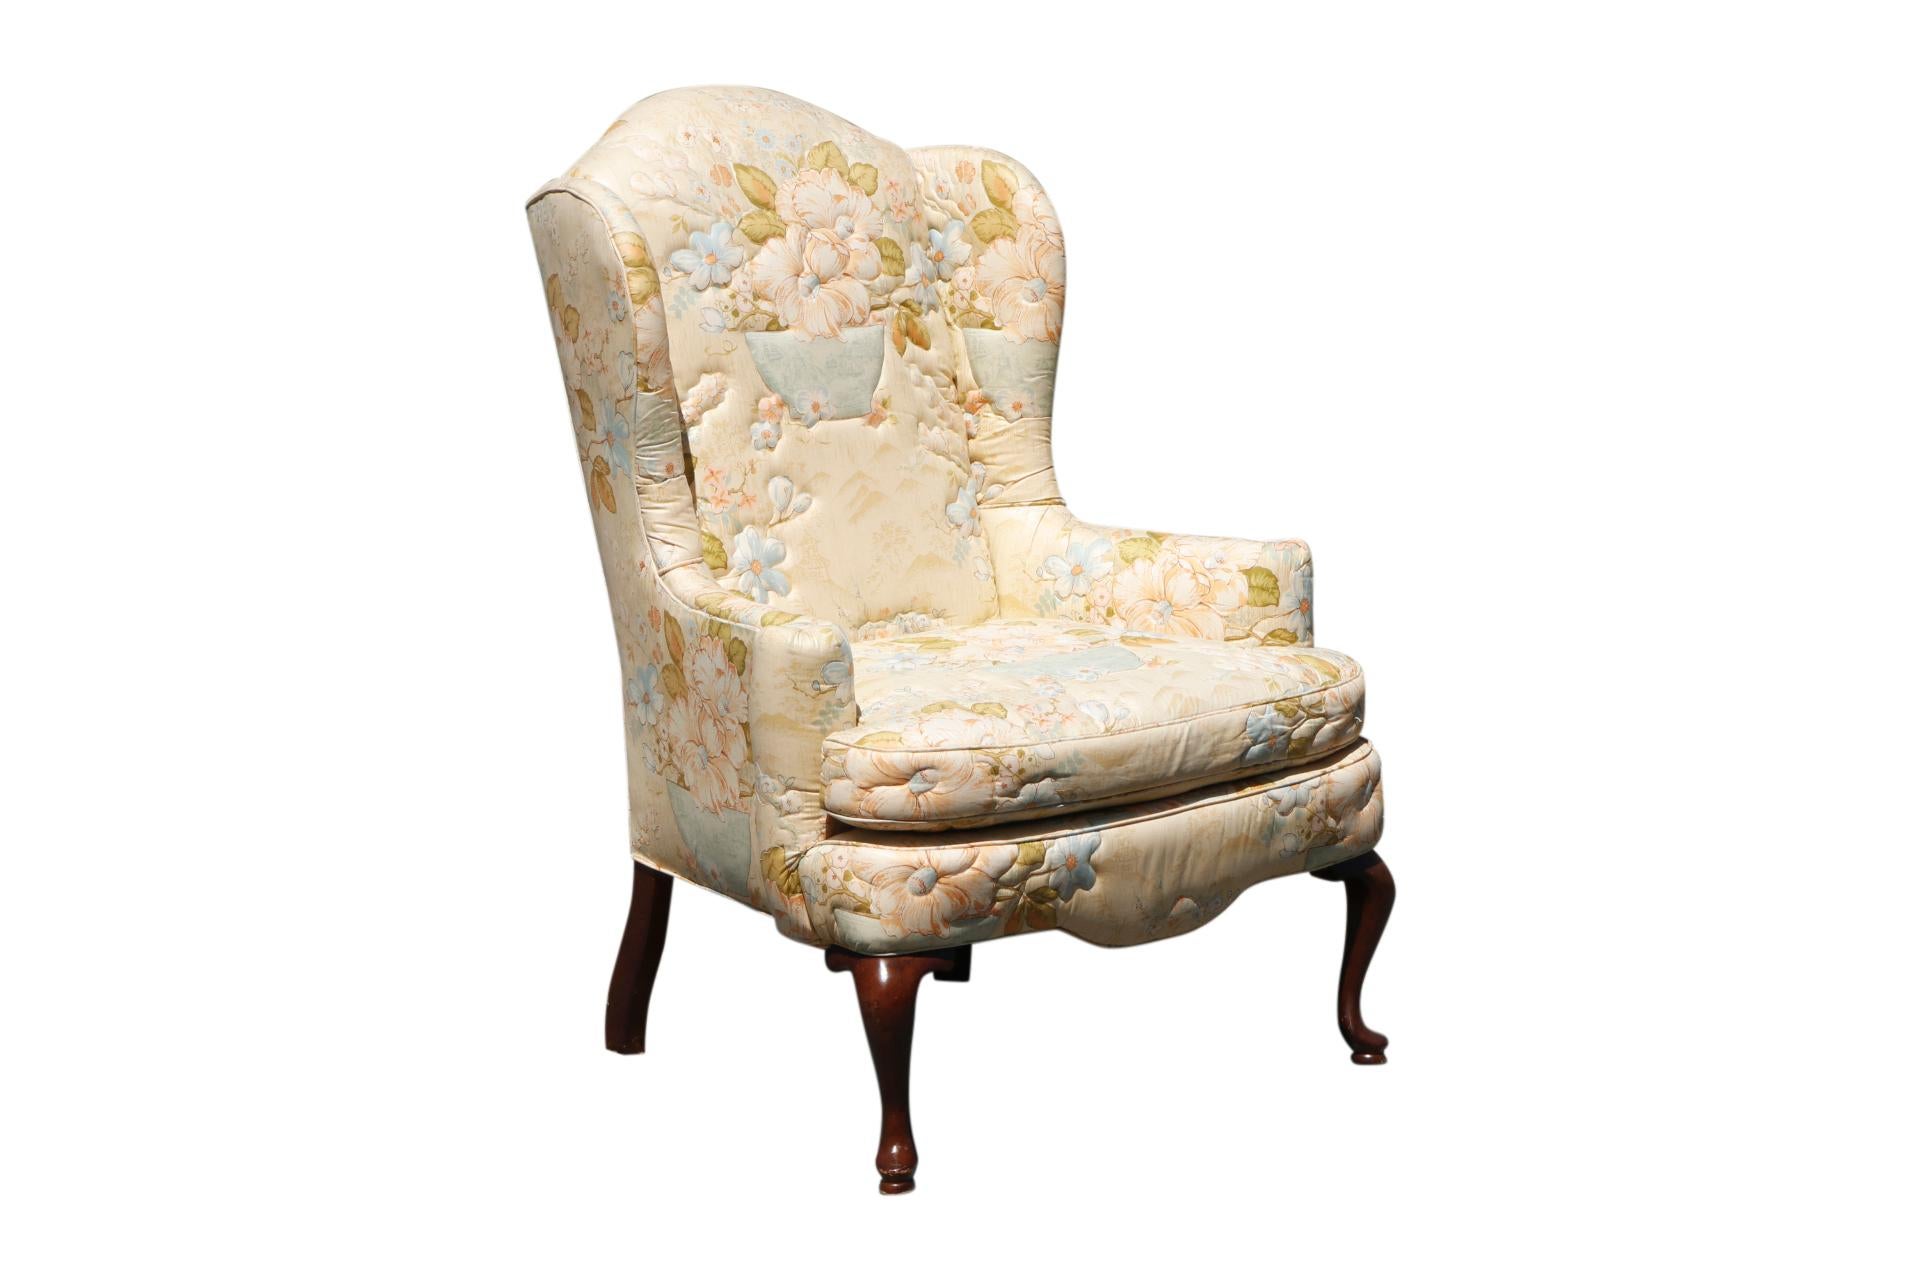 A pair of Queen Anne style wingback chairs made by Knob Creek. Upholstered throughout in a floral satin fabric with a quilted motif, framed with outward rolled arms and a serpentine skirt. Cabriole legs finish in rounded pad feet. Arm height 24.5